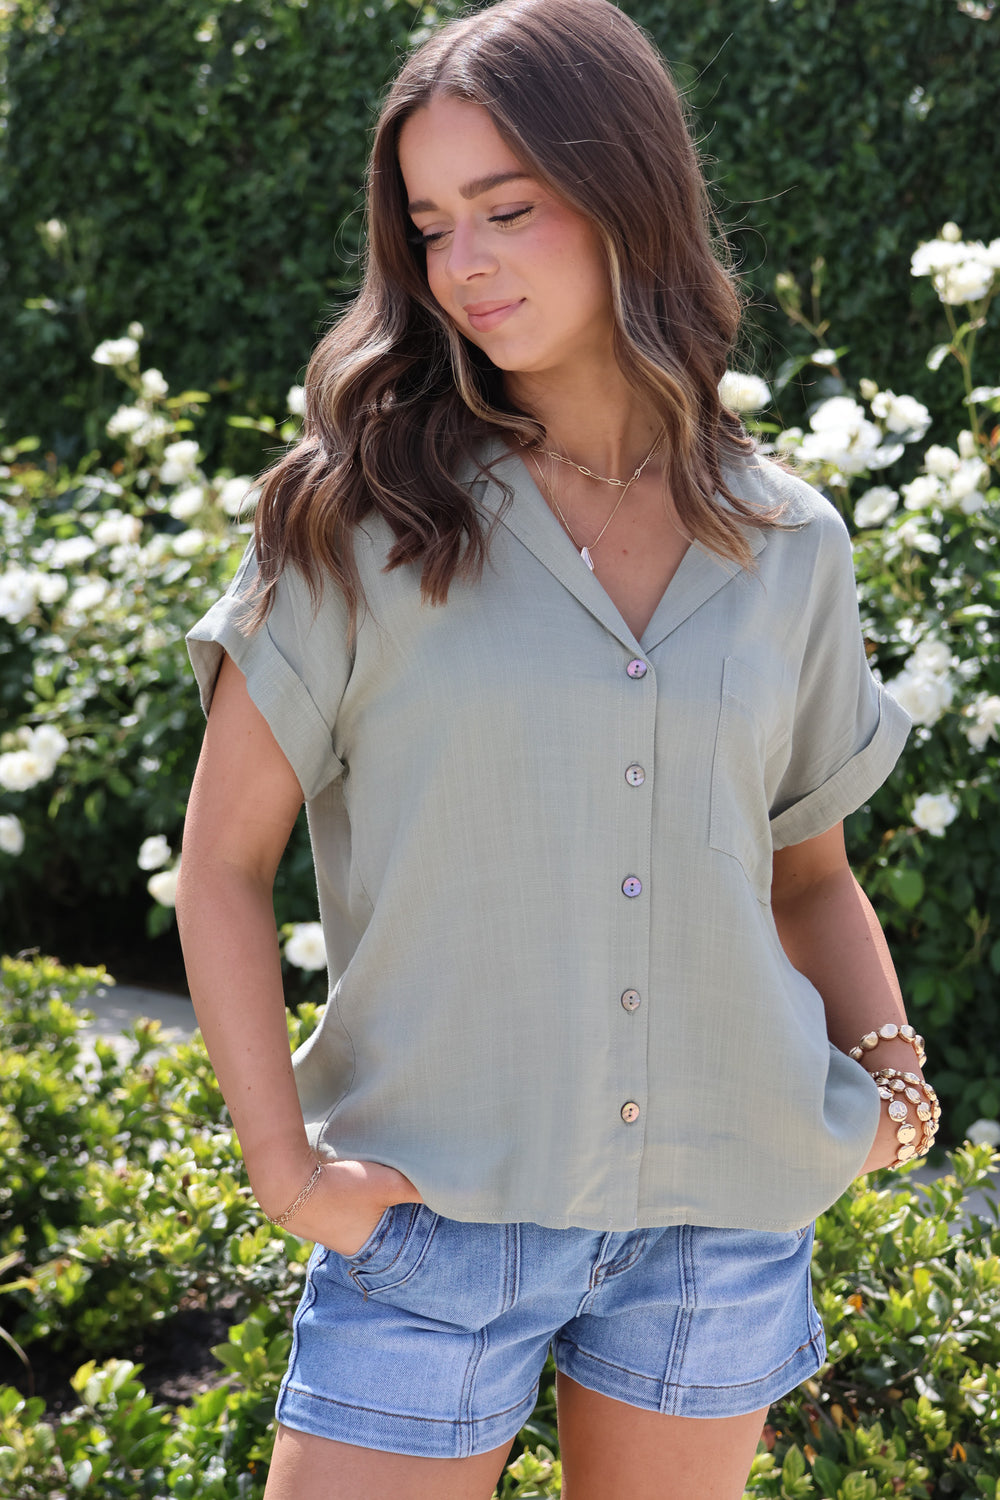 Brighter Days Ahead Top In Sage - ShopSpoiled